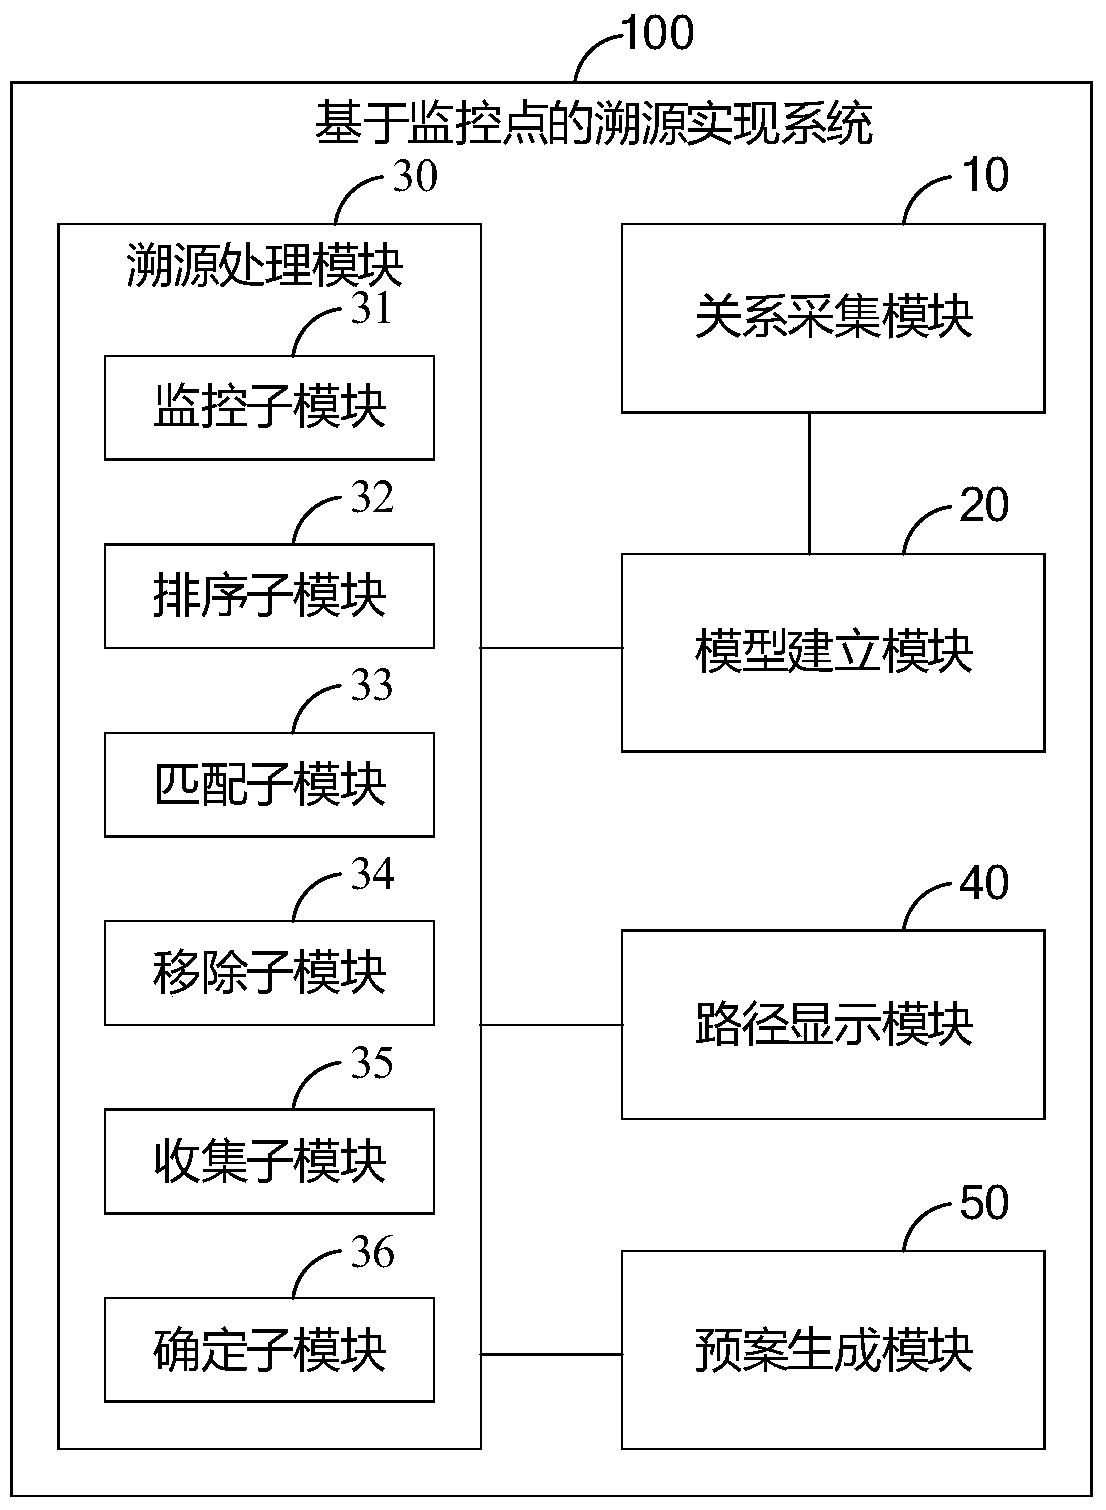 Method and system for implementing traceability based on monitoring points